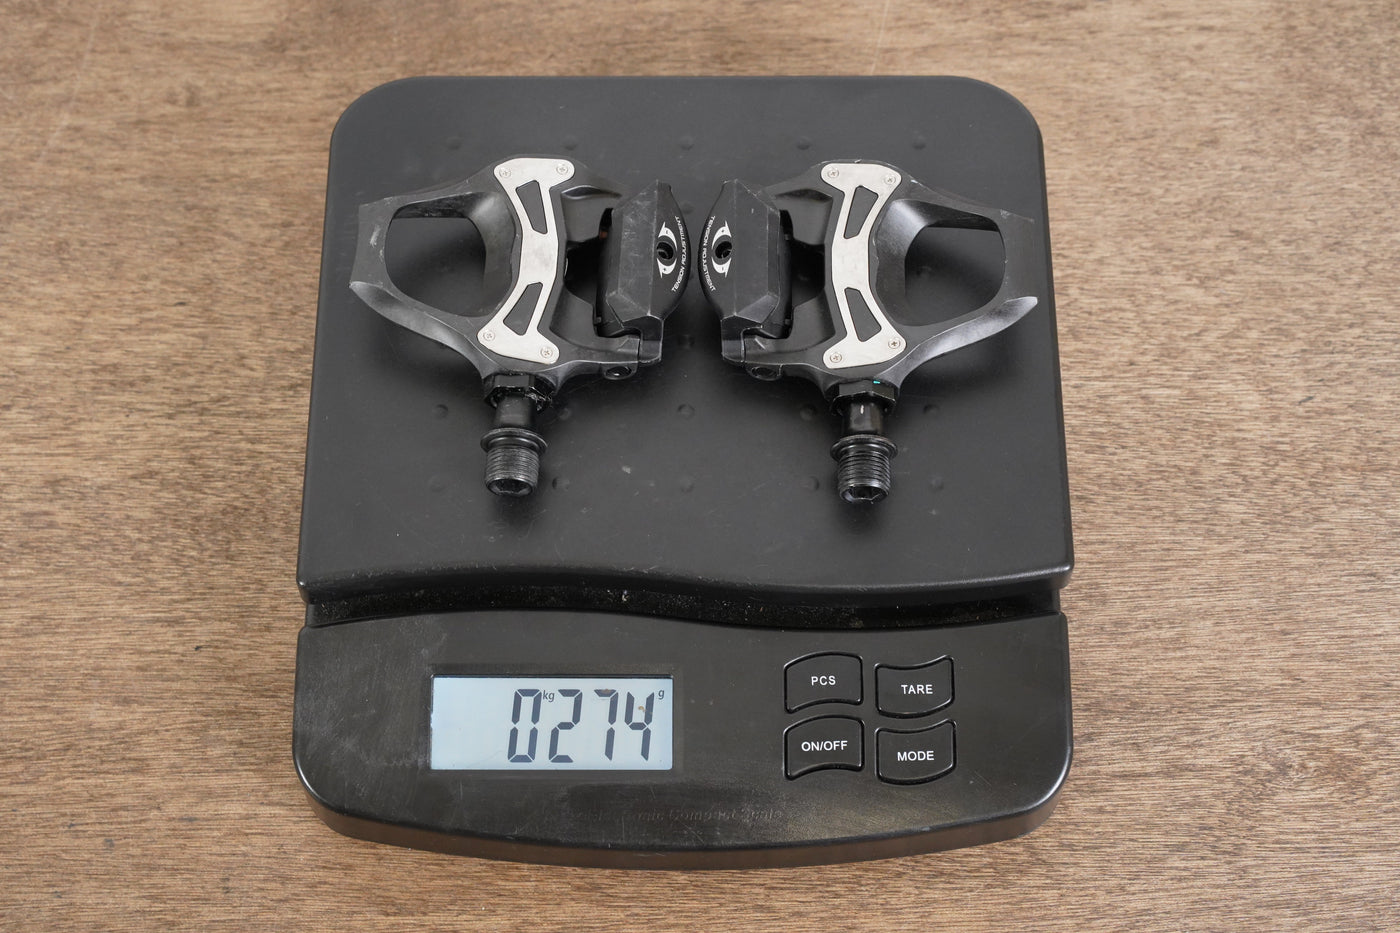 Shimano 105 PD-5800 SPD-SL Carbon Clipless Road Pedals 274g